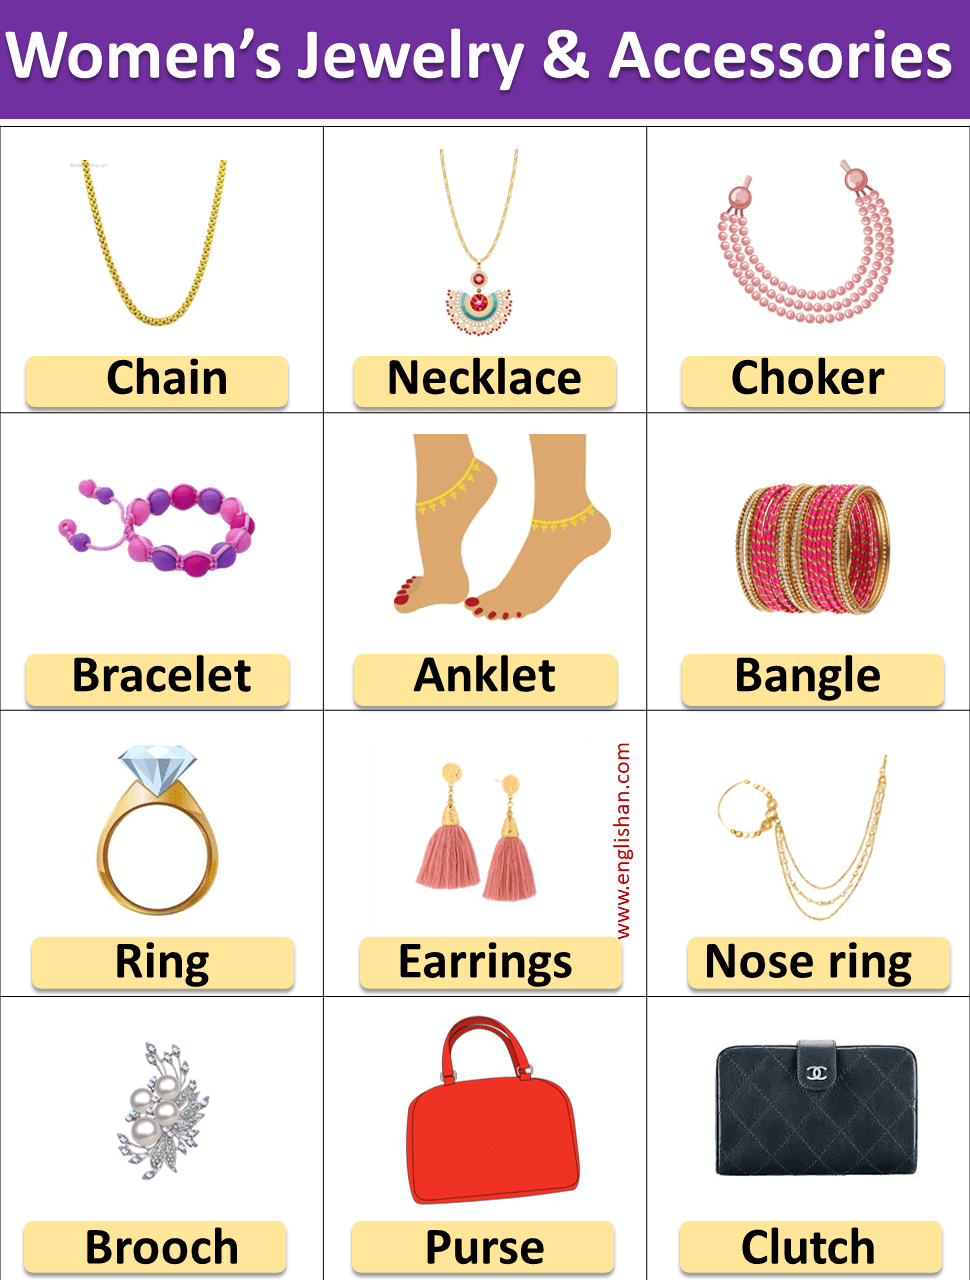 Women’s Jewelry & Accessories Picture Vocabulary